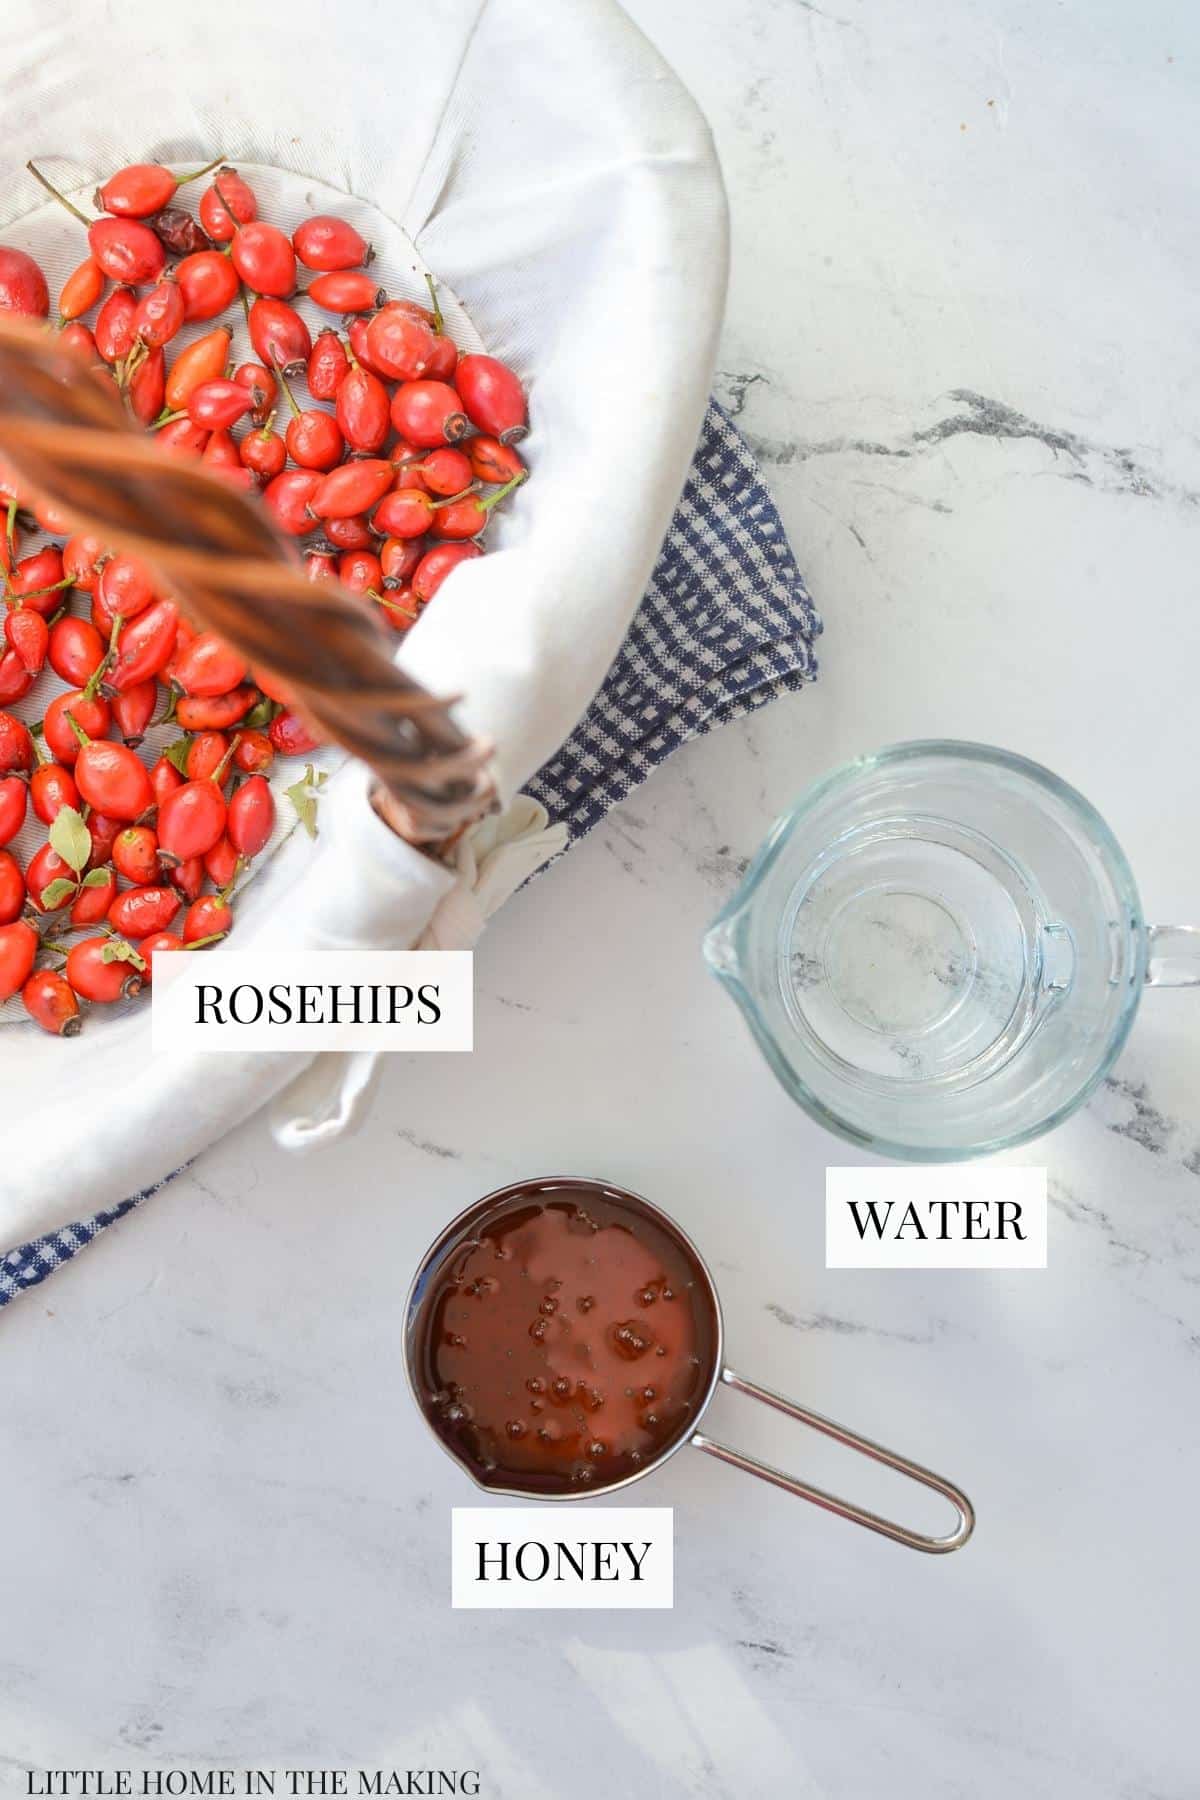 A basket of rosehips, some water, and some honey.